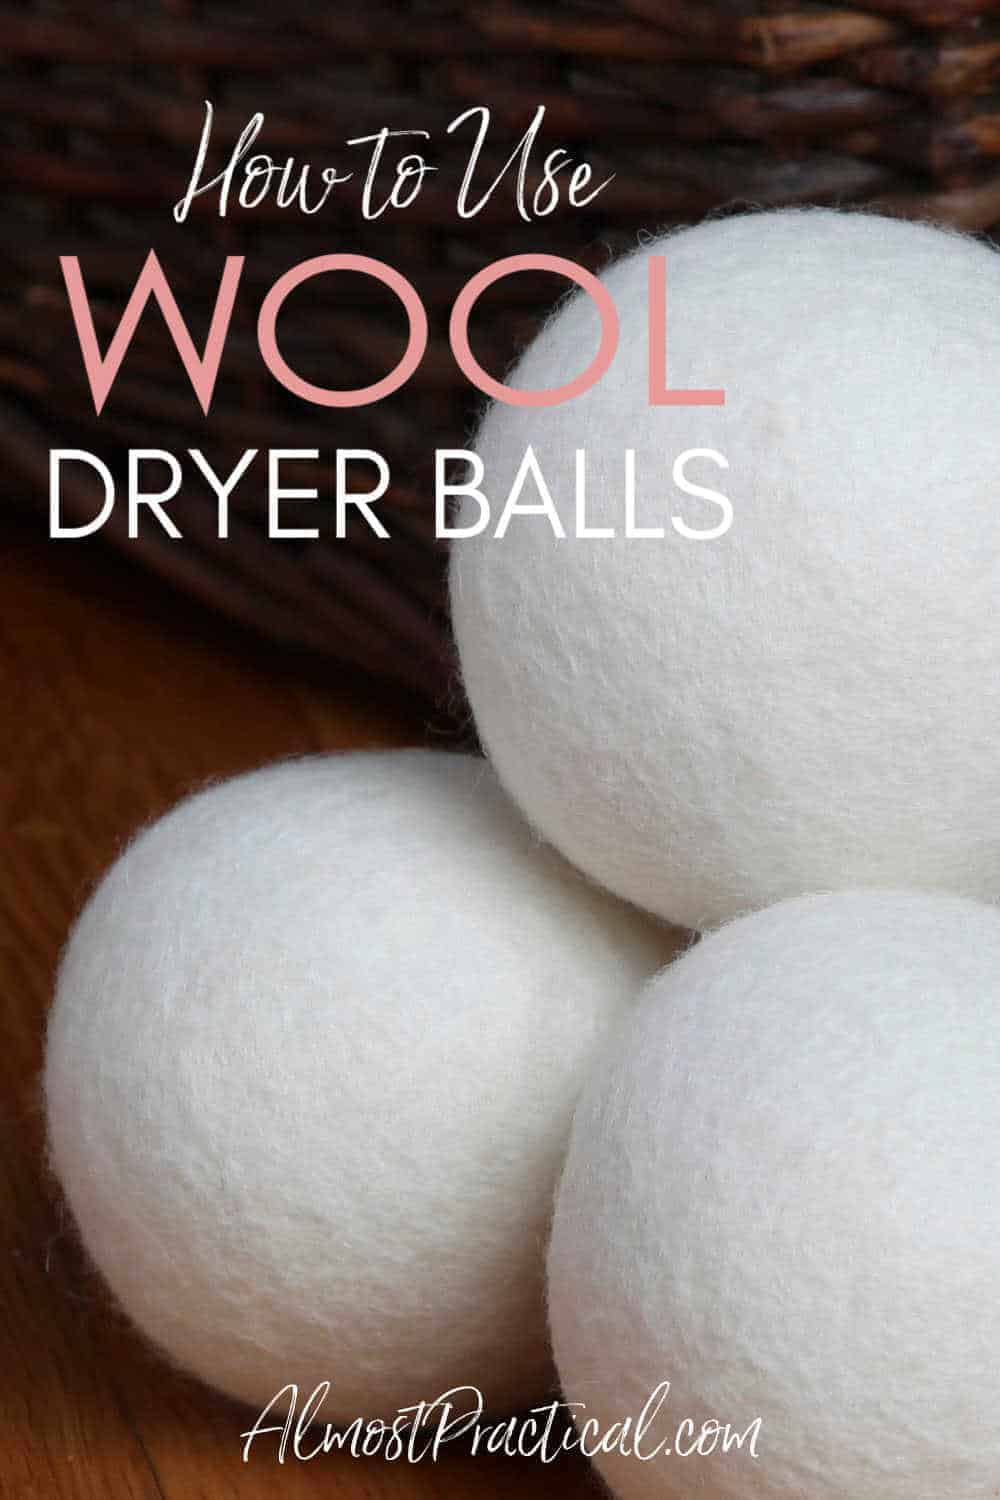 Wool Dryer Balls Including Their Benefits And Why You Shouldn't Use Them  With Essential Oils